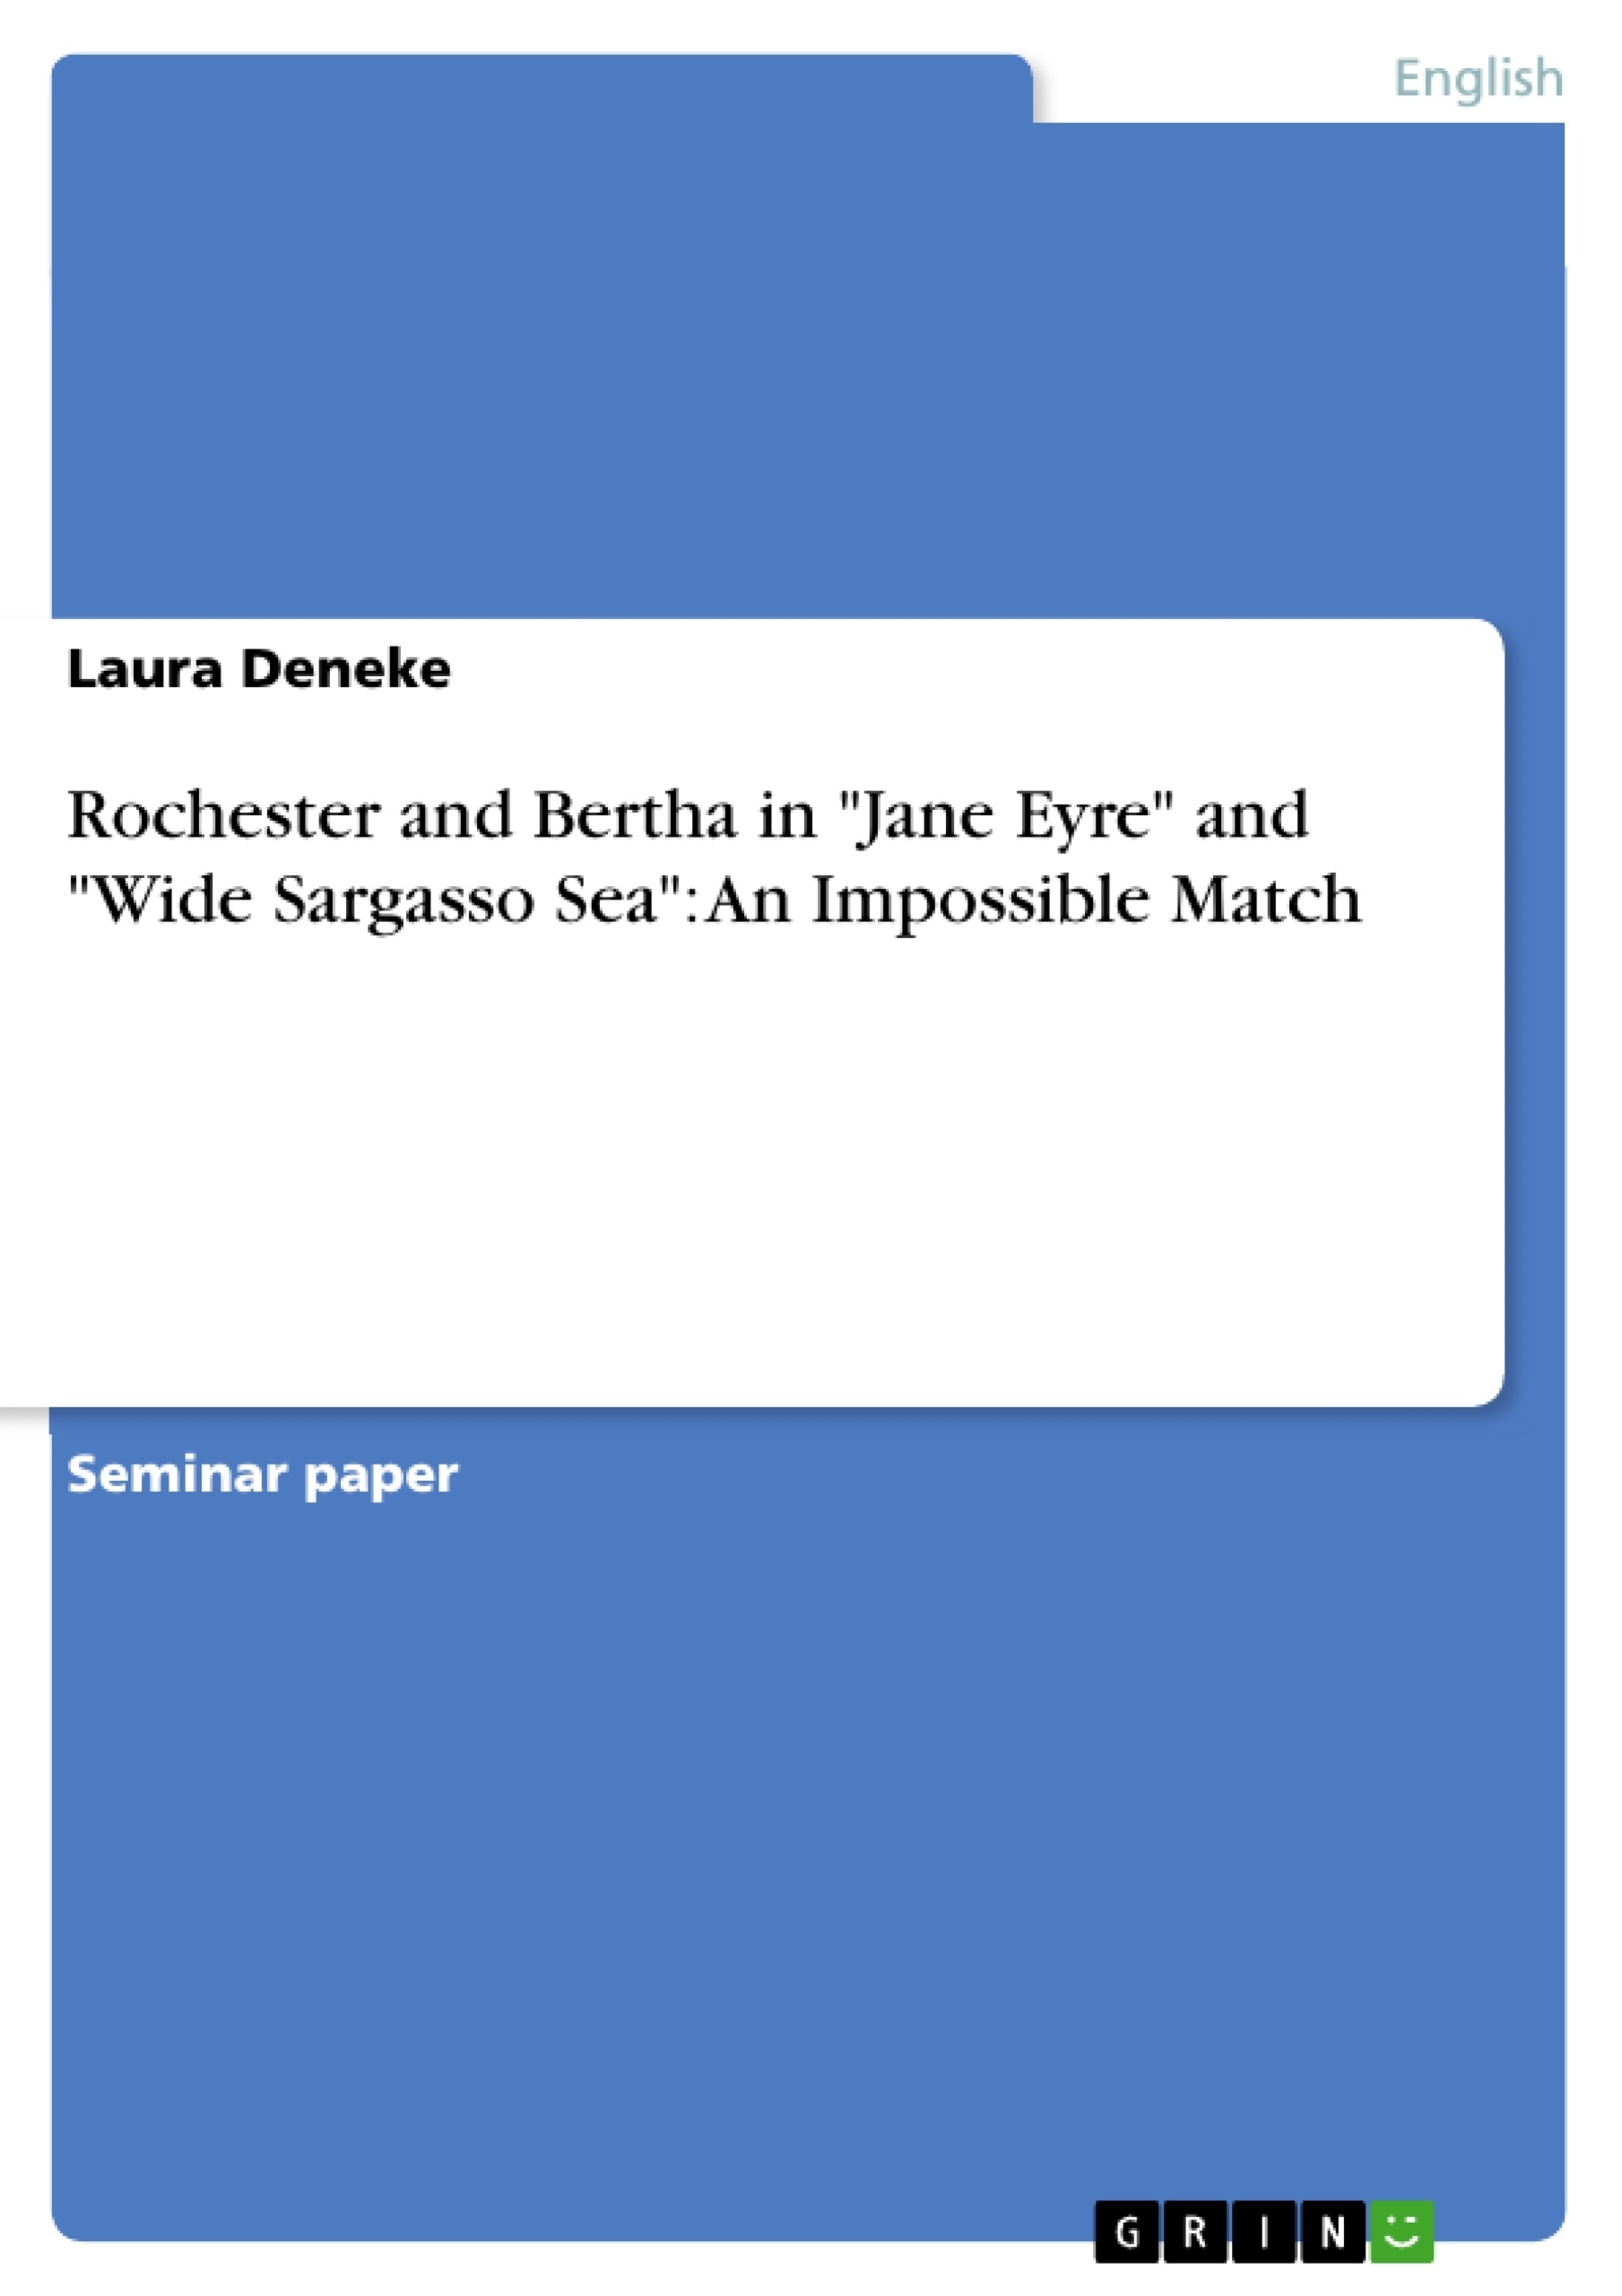 Titel: Rochester and Bertha in "Jane Eyre" and "Wide Sargasso Sea": An Impossible Match